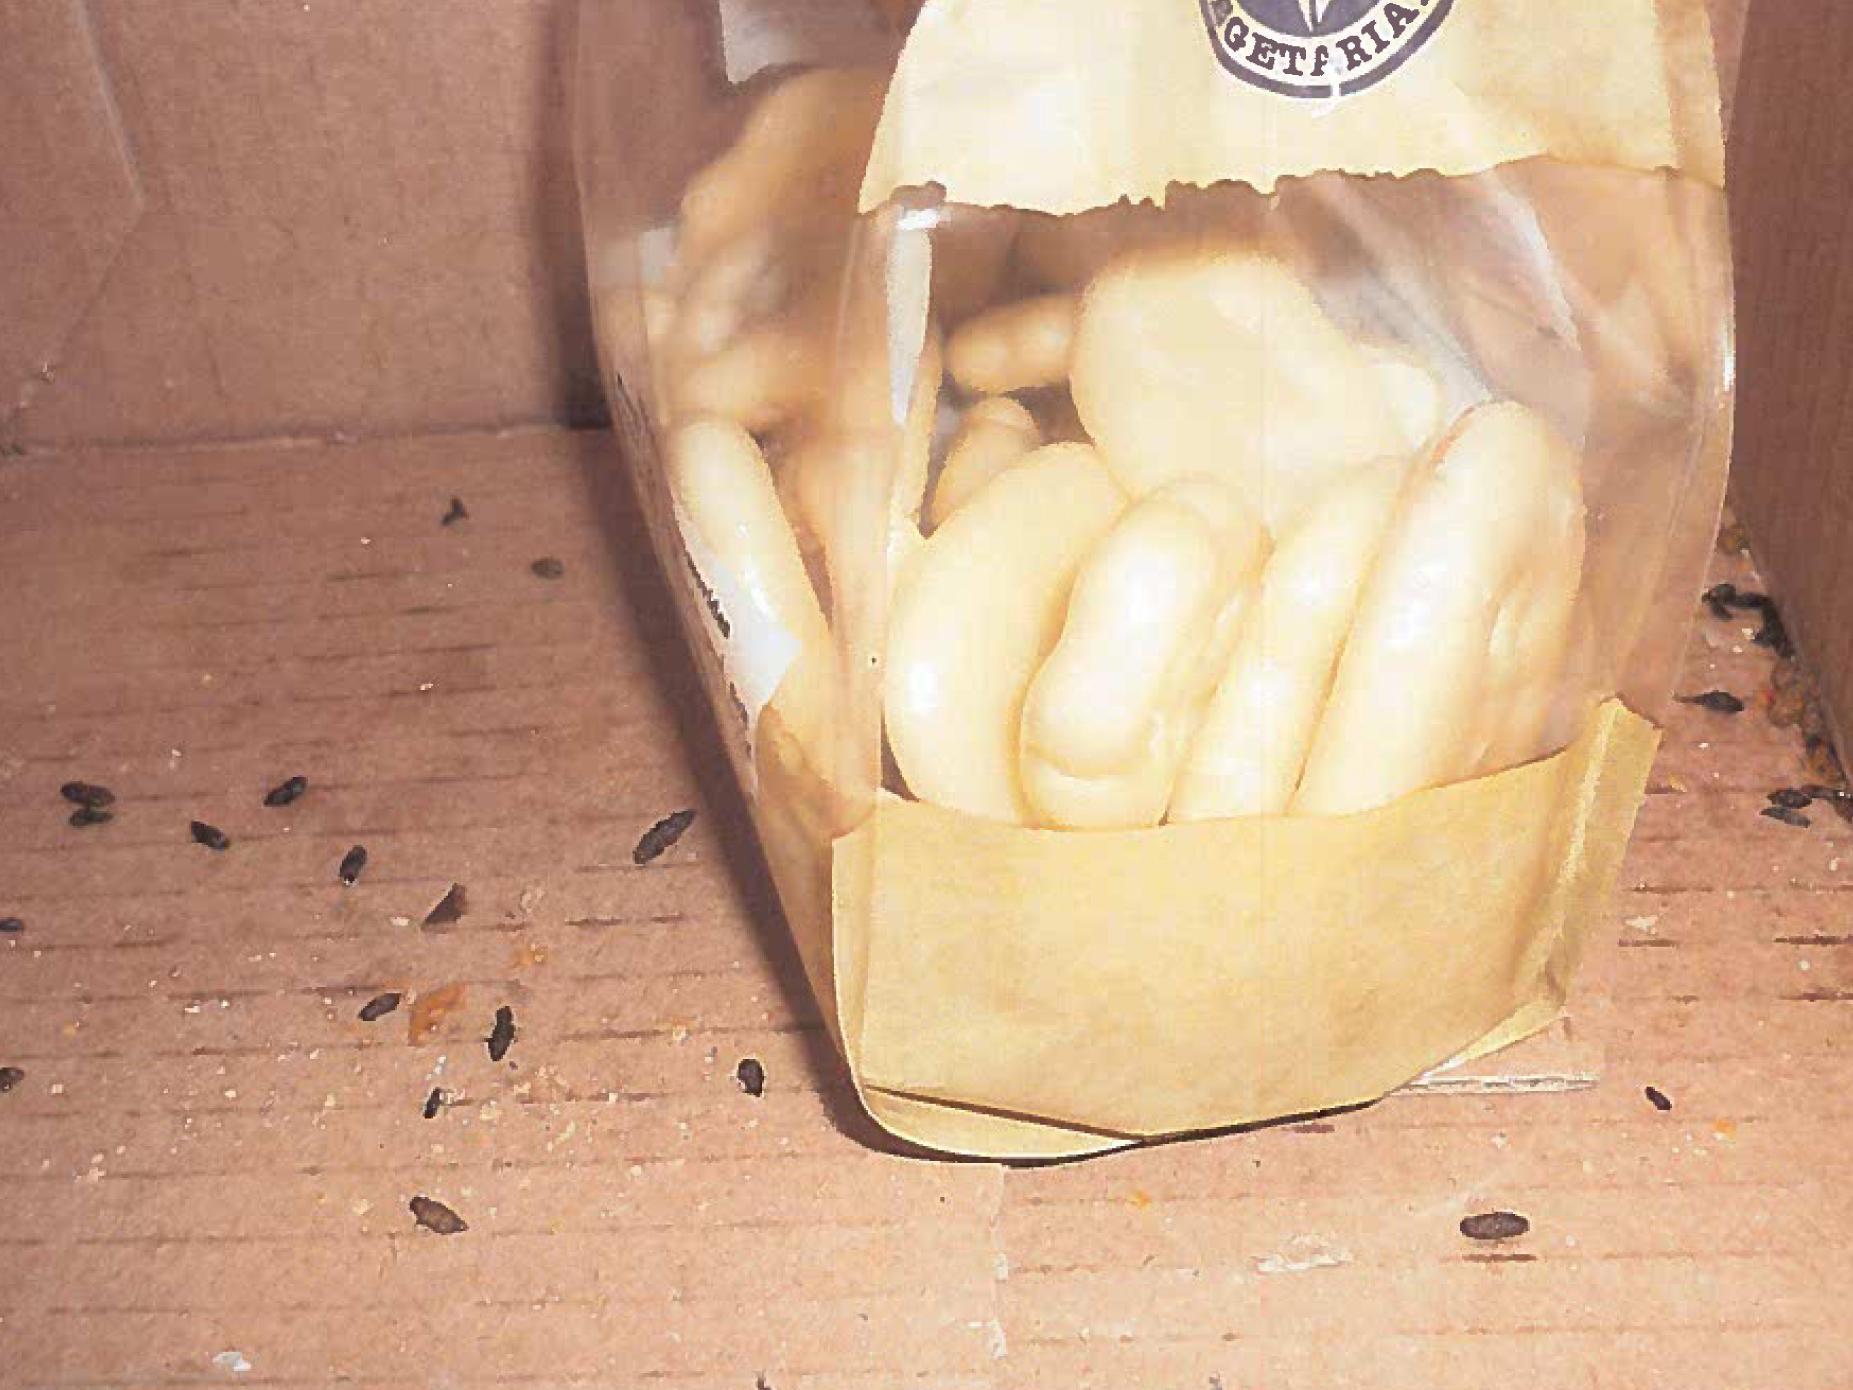 Mouse droppings were found on the floor and among food products at Poundworld in Croydon, south London